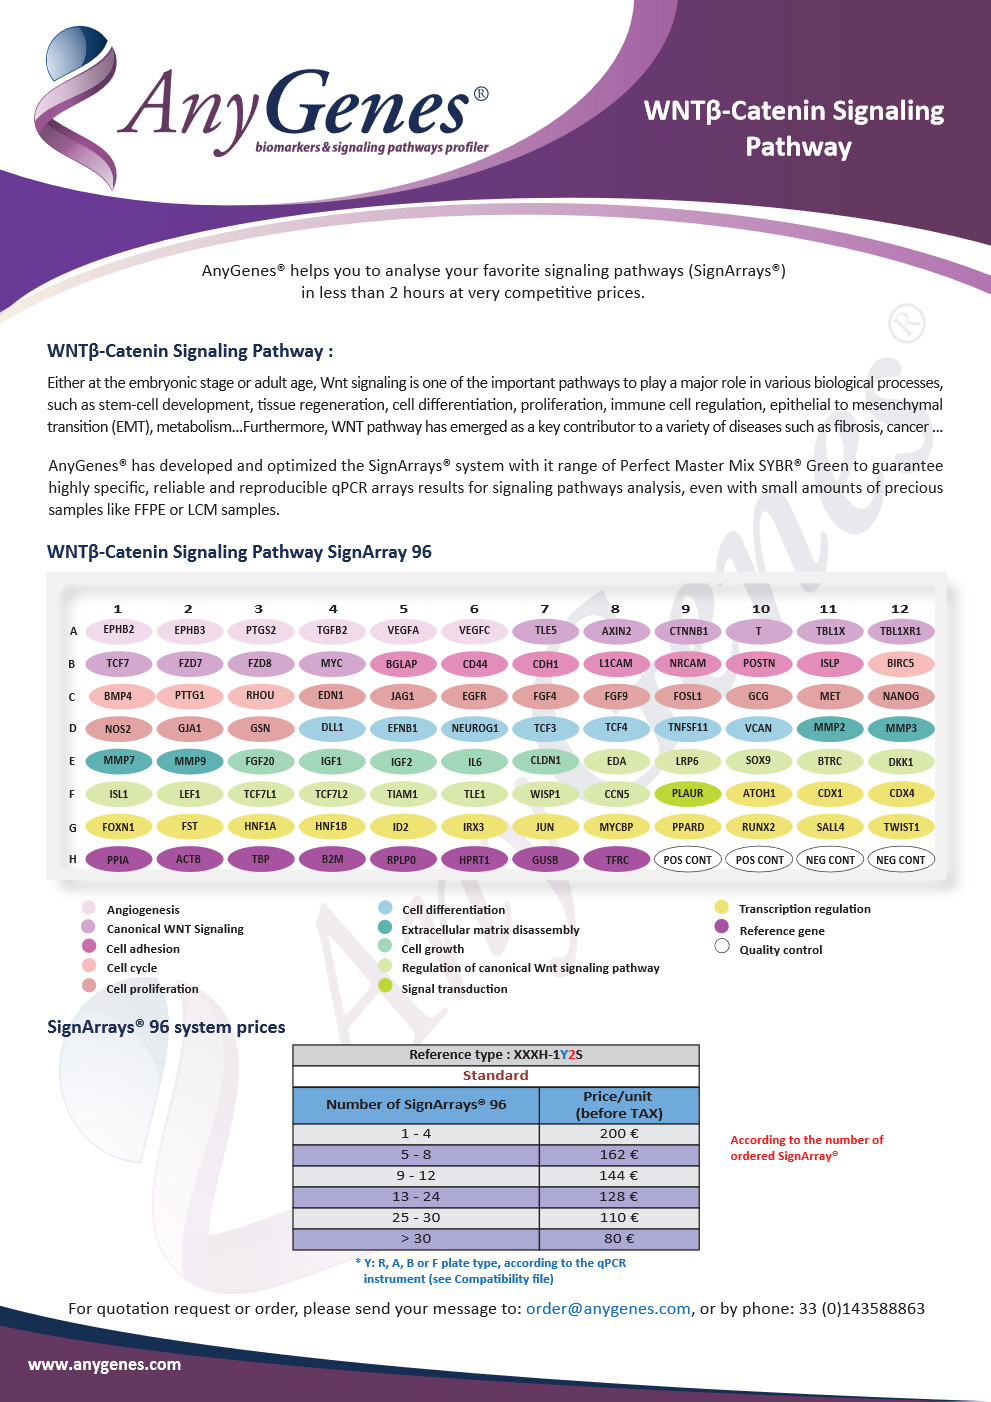 flyers and posters, WNTbeta Catenin Signaling Pathway